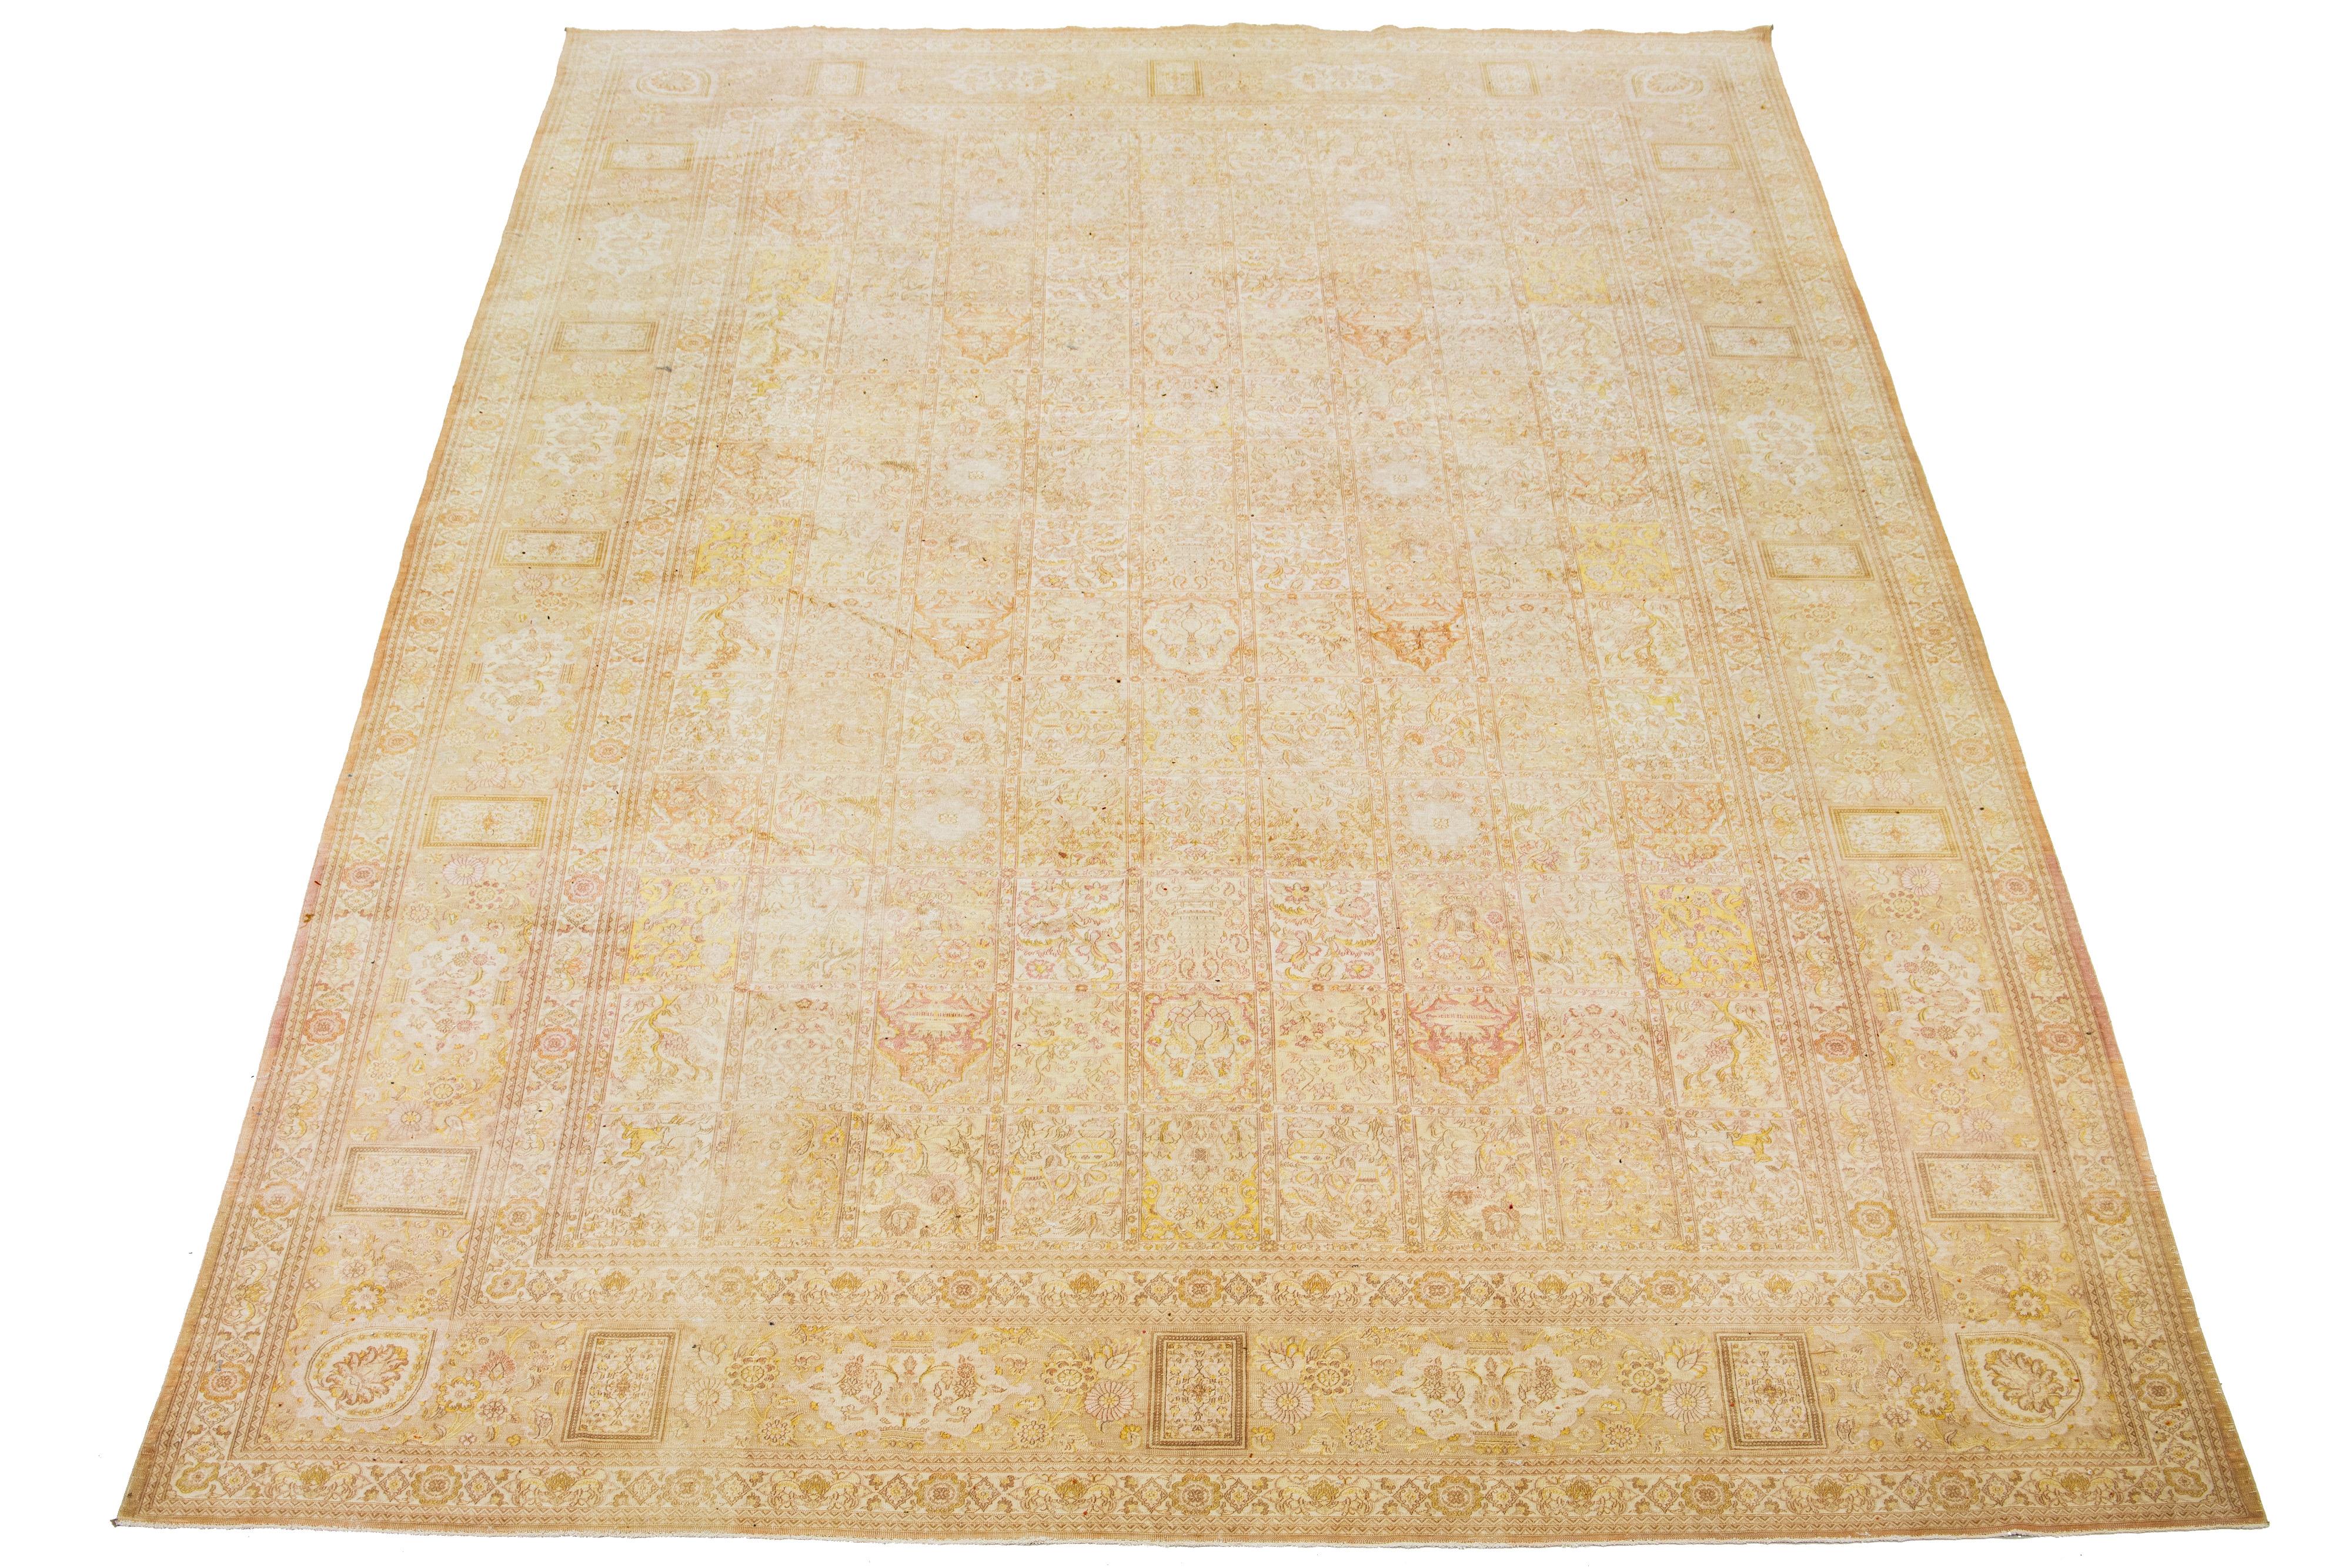 This handcrafted Persian Tabriz wool rug features a traditional floral pattern. The contrast between the beige background highlights the brown, orange, and yellow floral design.

This rug measures 13' x 19'6'.

Our Rugs are professionally cleaned